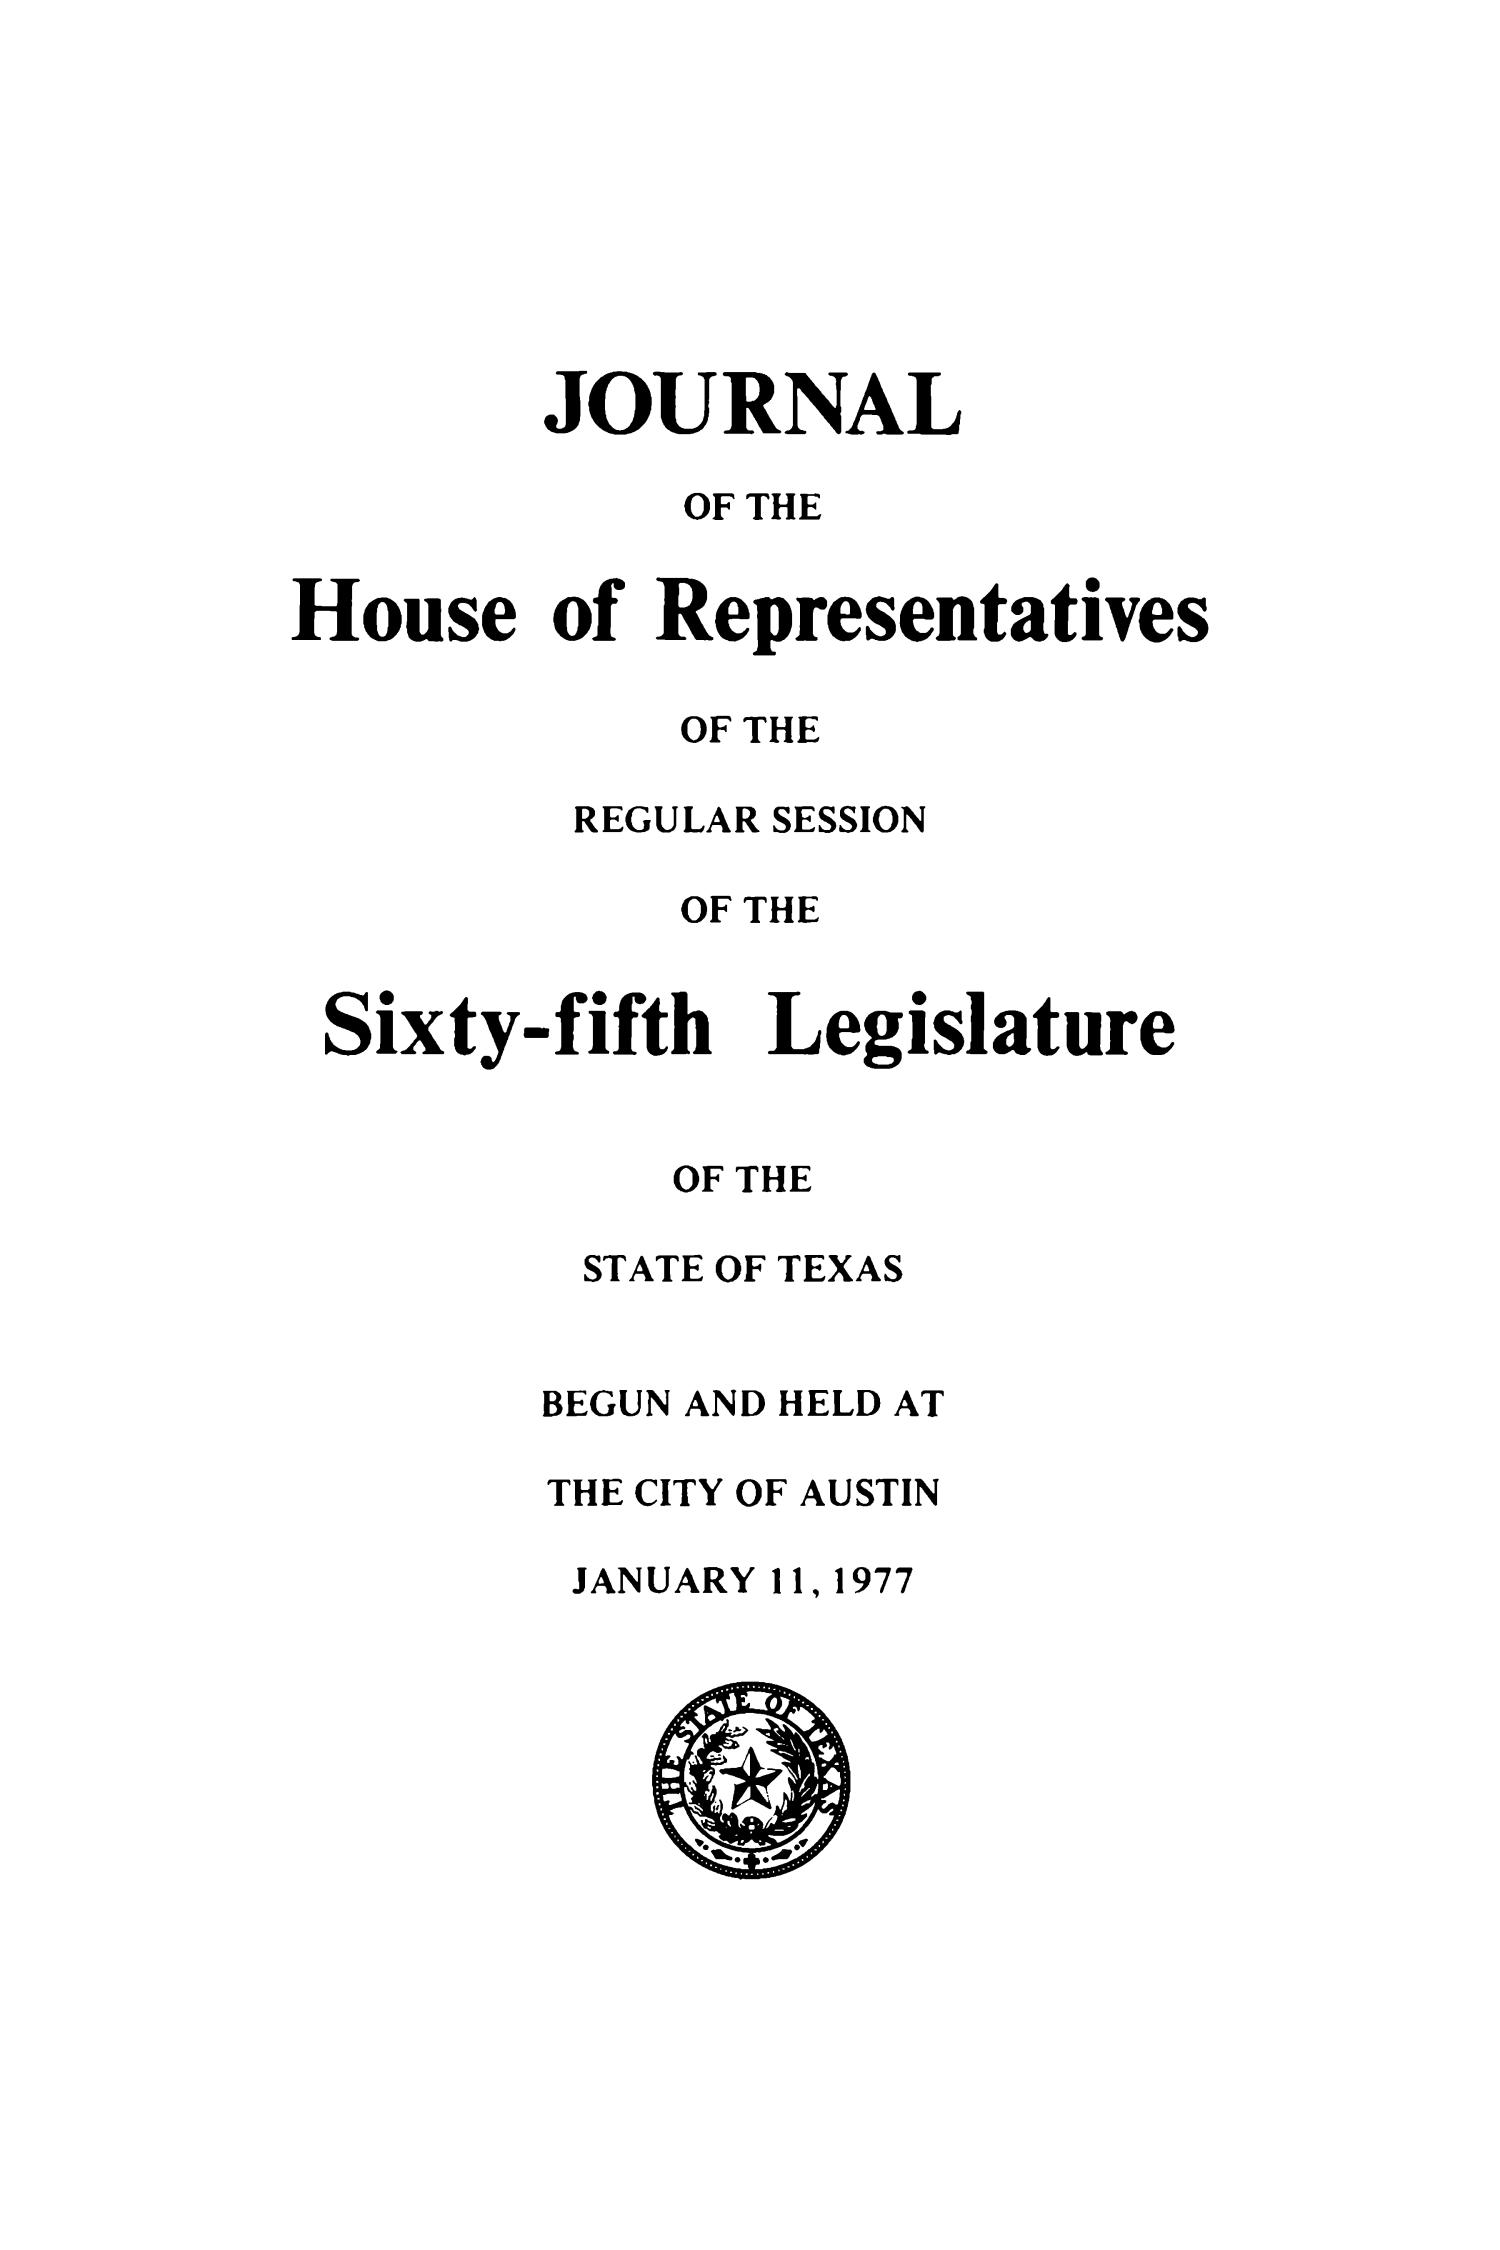 Journal of the House of Representatives of the Regular Session of the Sixty-Fifth Legislature of the State of Texas, Volume 1
                                                
                                                    Title Page
                                                